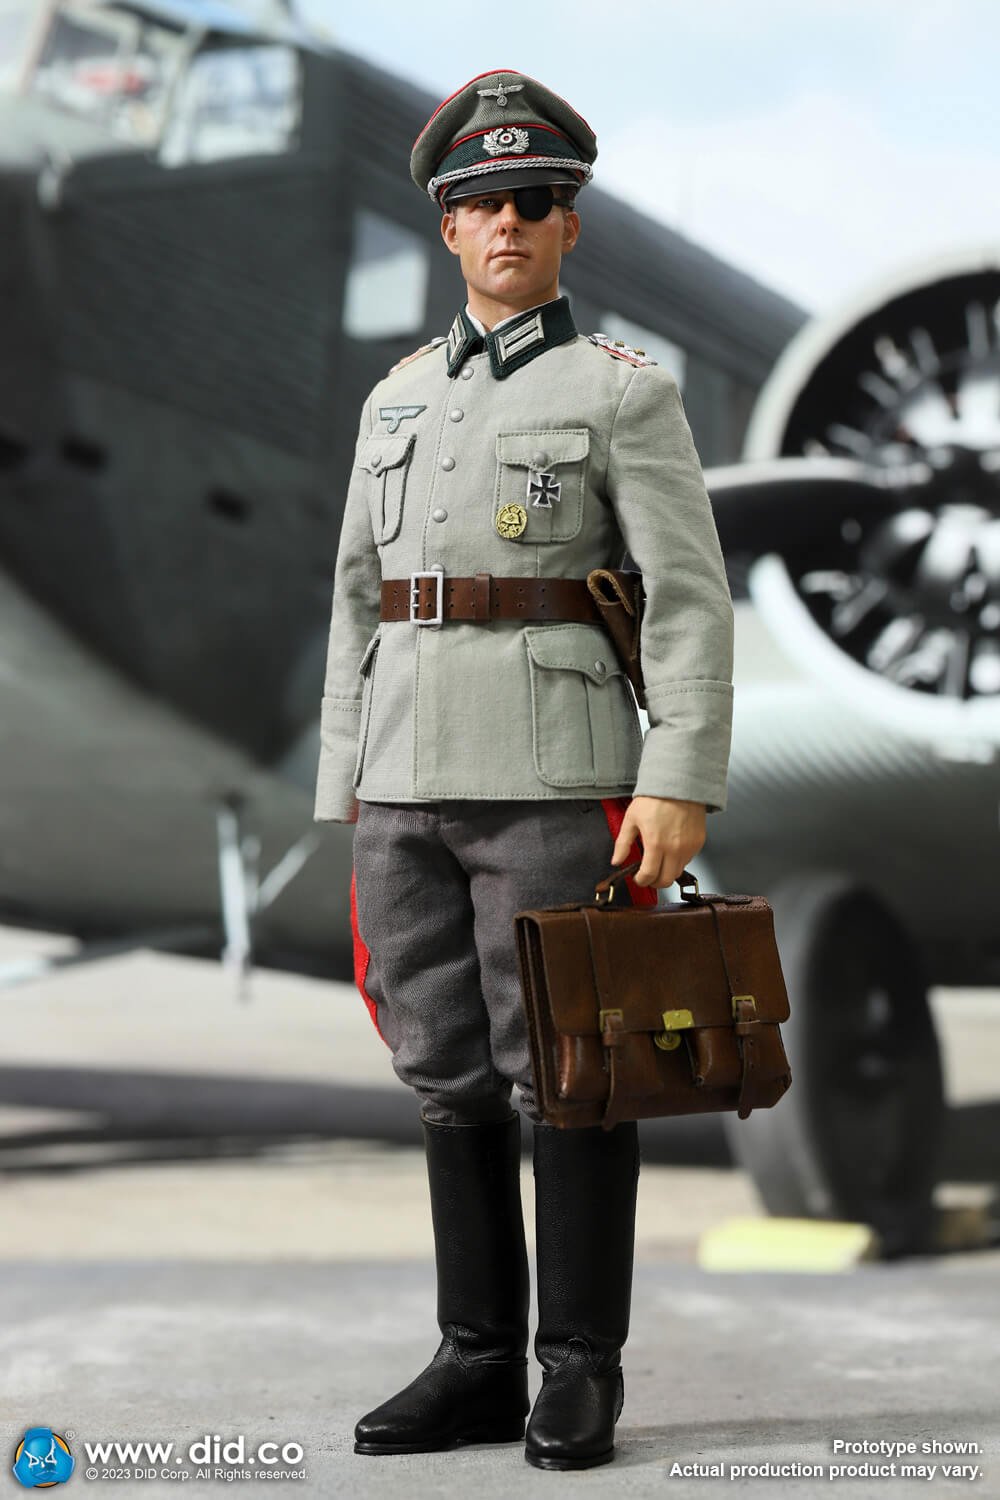 movie-based - NEW PRODUCT: DiD: D80162 Oberst I.G. Claus Von Stauffenberg  OPERATION VALKYRIE 11897